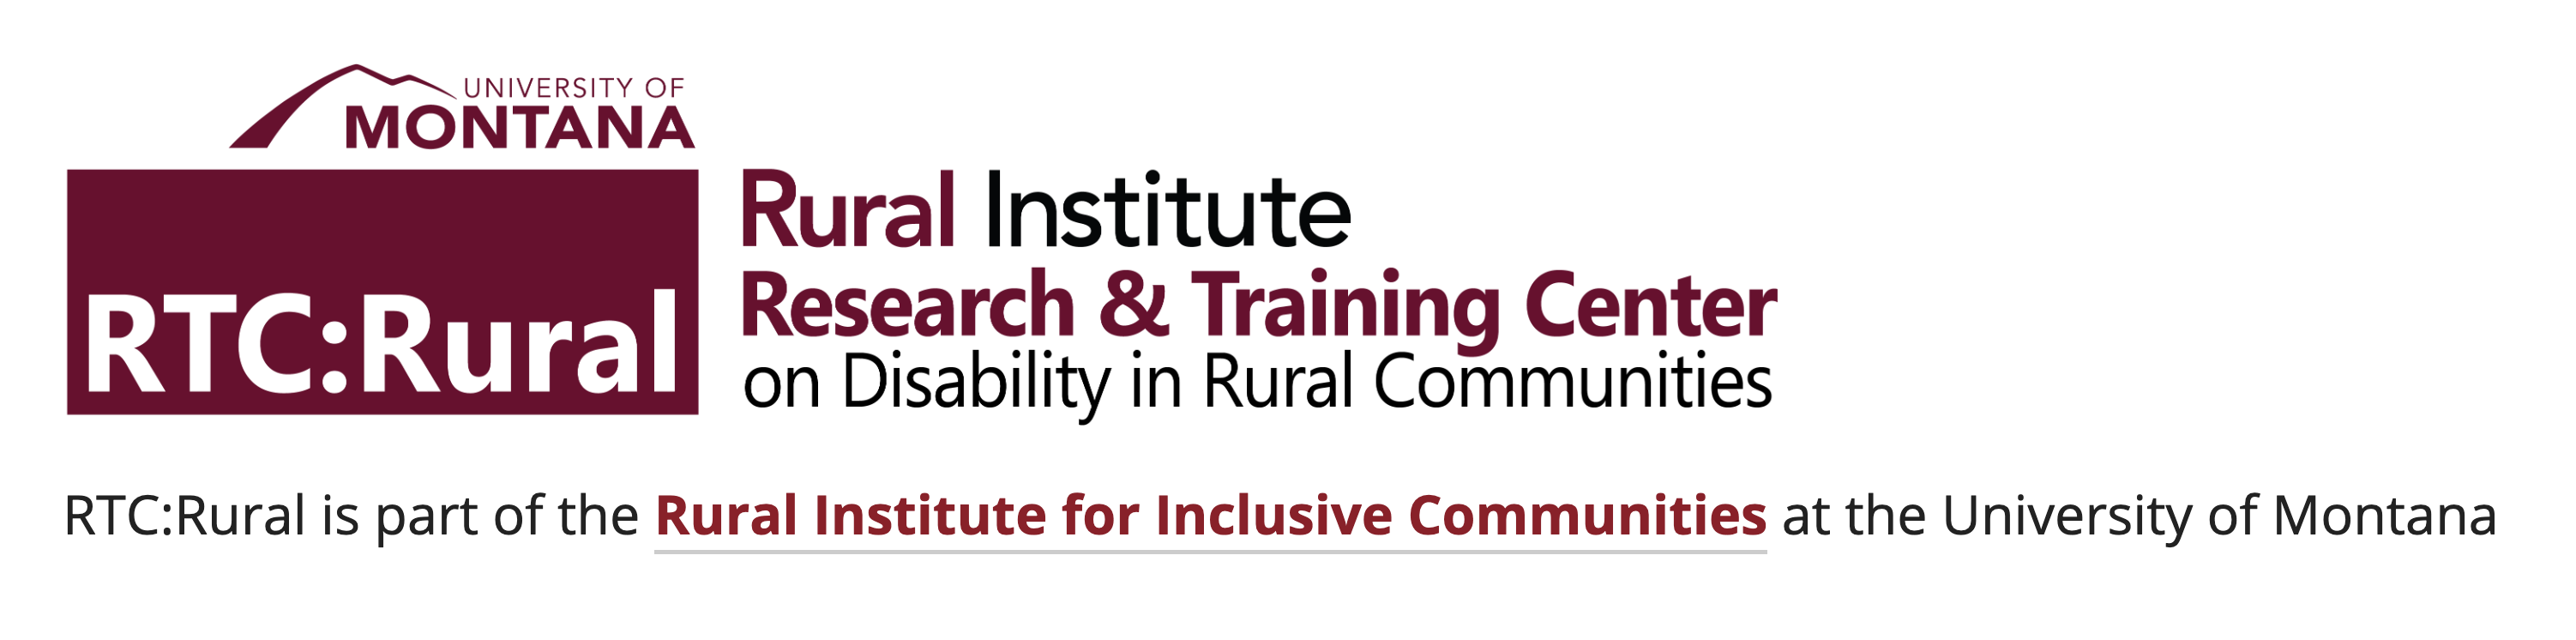 University of Montana RTC: Rural Rural Institute Research and Training Center logo